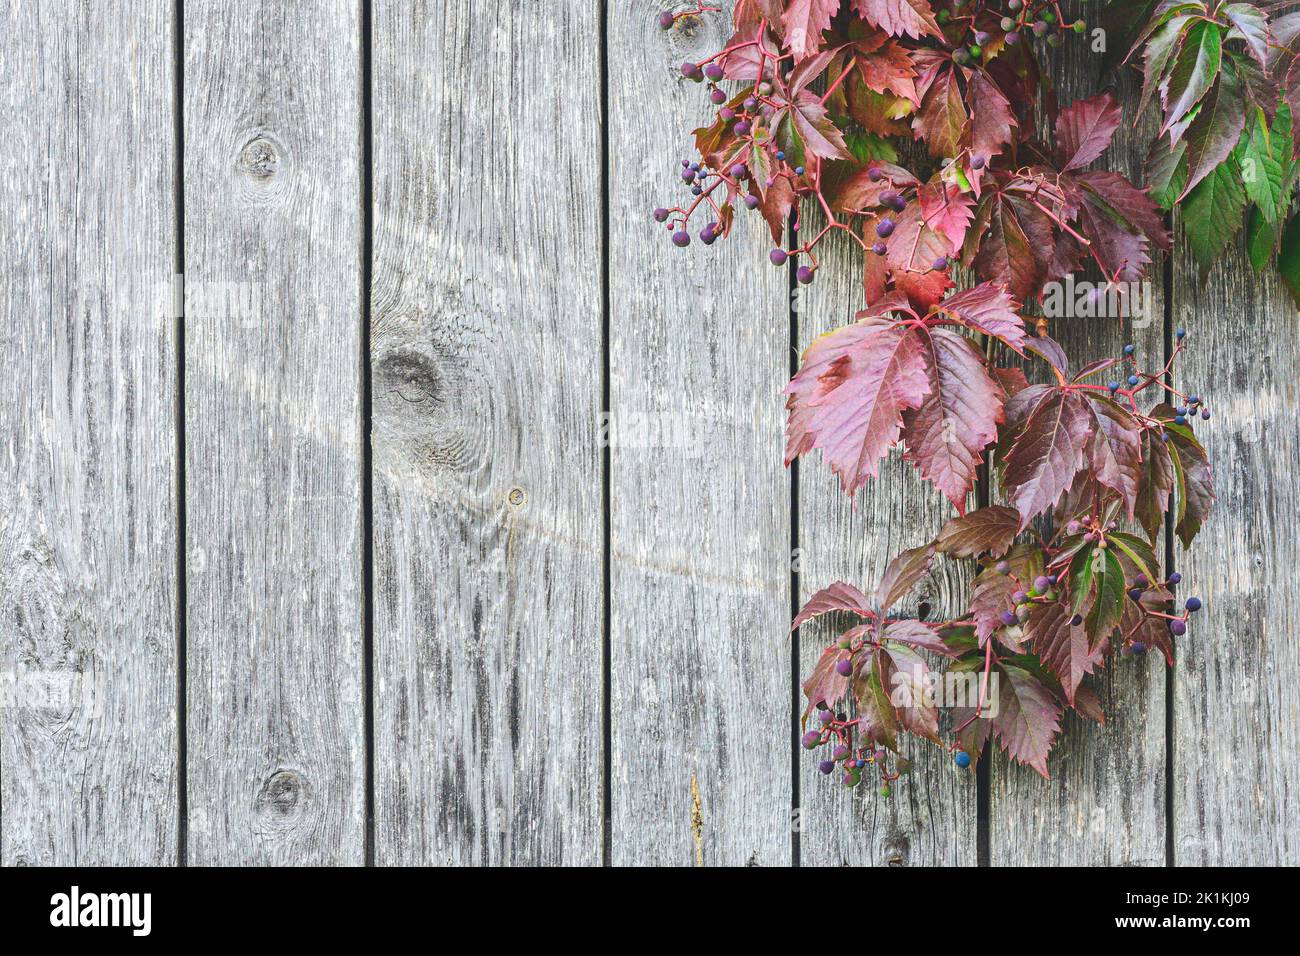 Beautiful background of stripped light grey old wood wall with climbing plant or vine, red leaves and berries in autumn, copy space Stock Photo